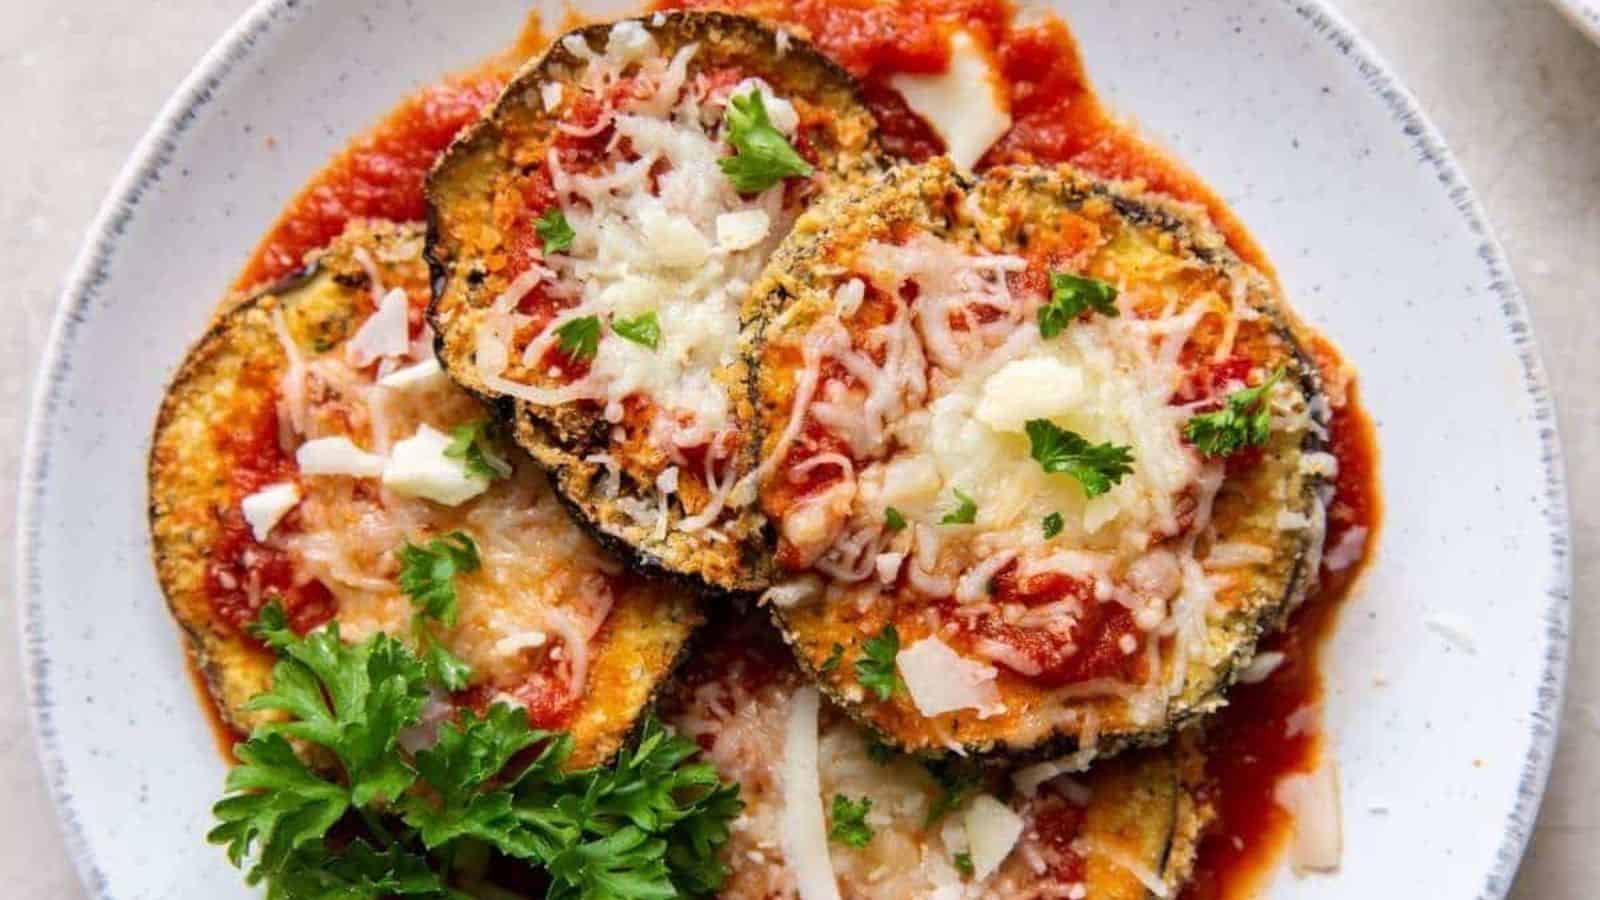 Air fryer eggplant parmesan in a plate with with basil leaves to add a pop of color and freshness.